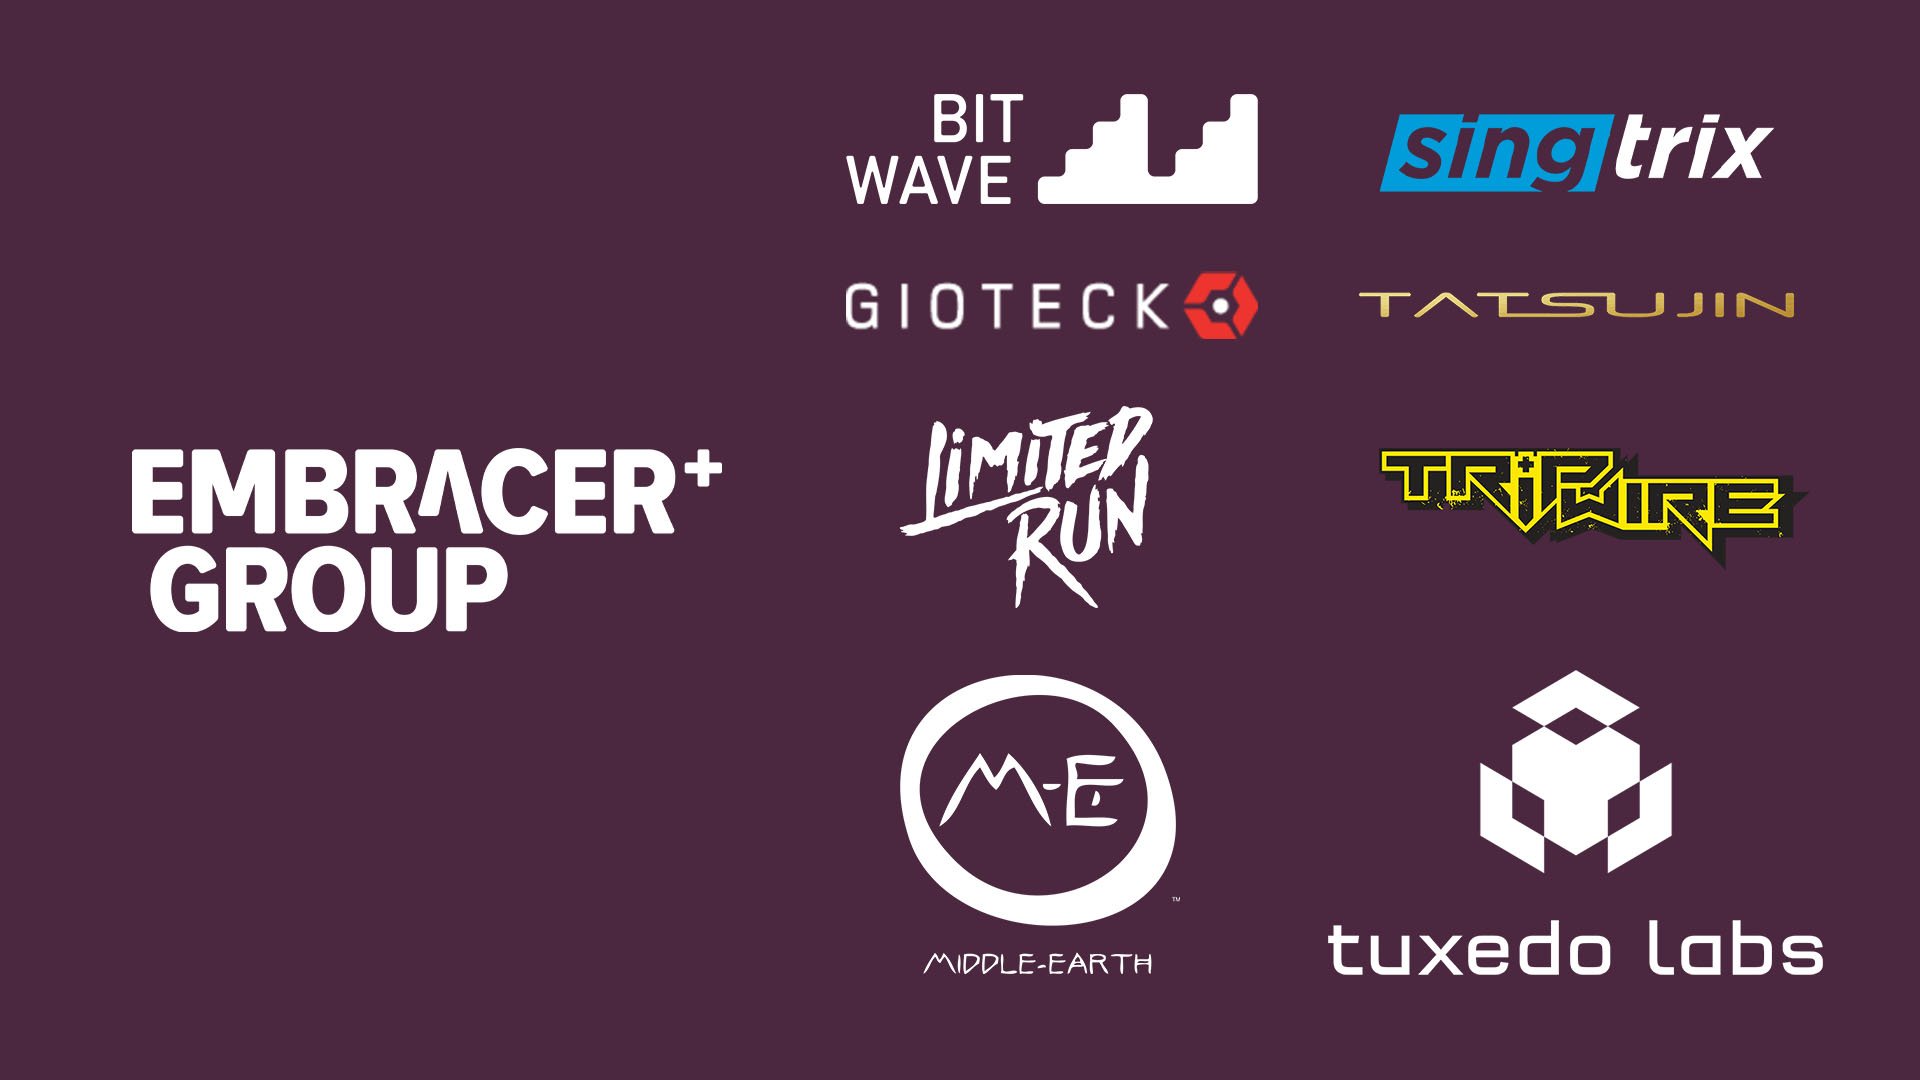 #
      Embracer Group acquires Bitwave Games, Gioteck, Limited Run Games, Middle-earth Enterprises, Singtrix, Tatsujin, Tripwire Interactive, and Tuxedo Labs